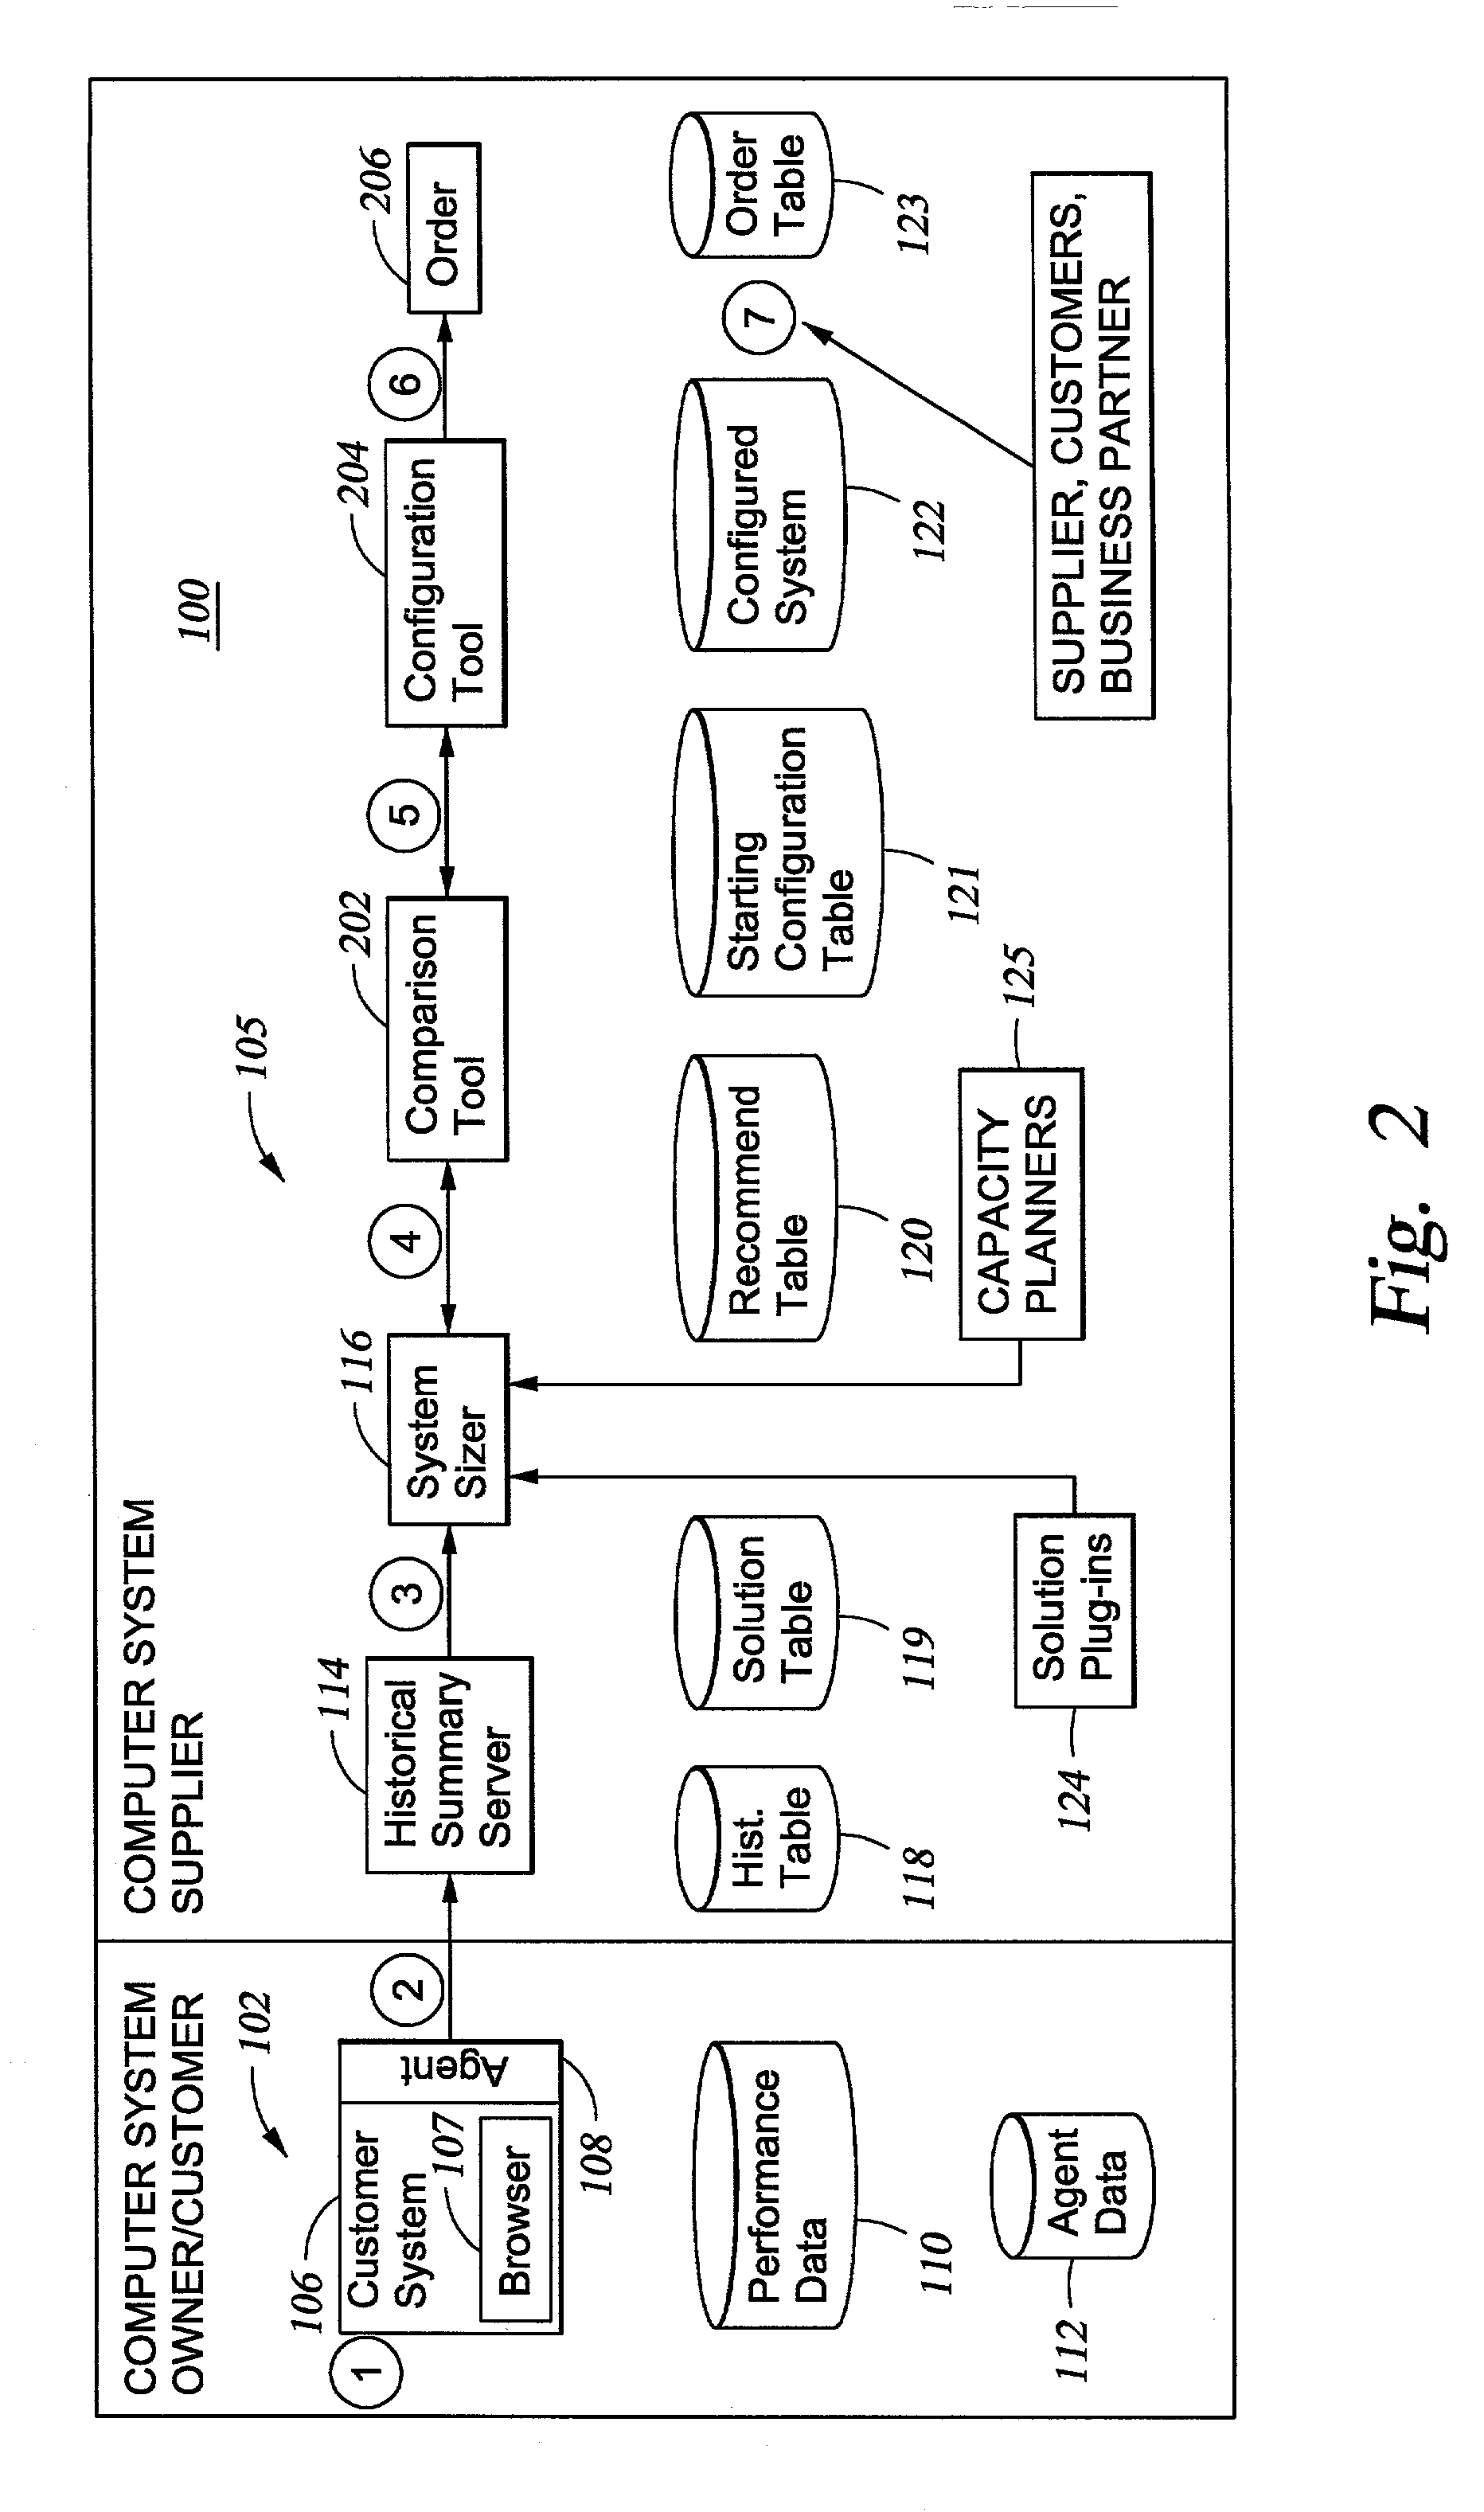 Method and apparatus for automating software upgrades